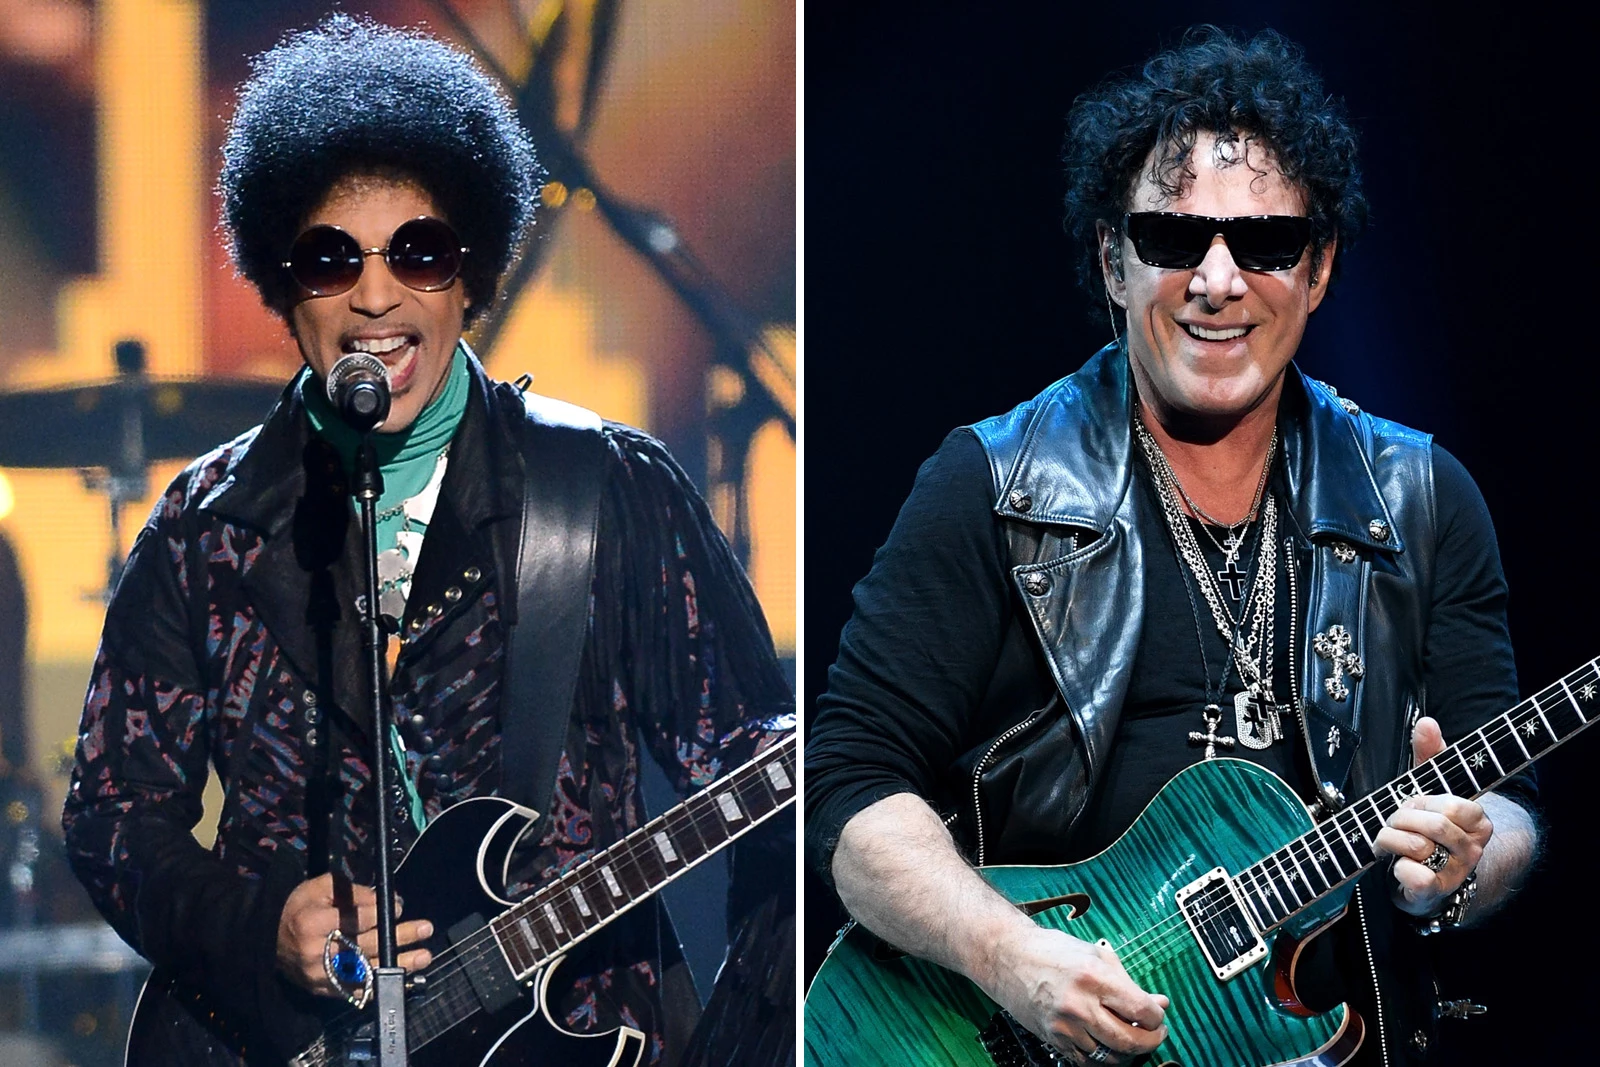 How Neal Schon Completed a Circle With His 'Purple Rain' Cover